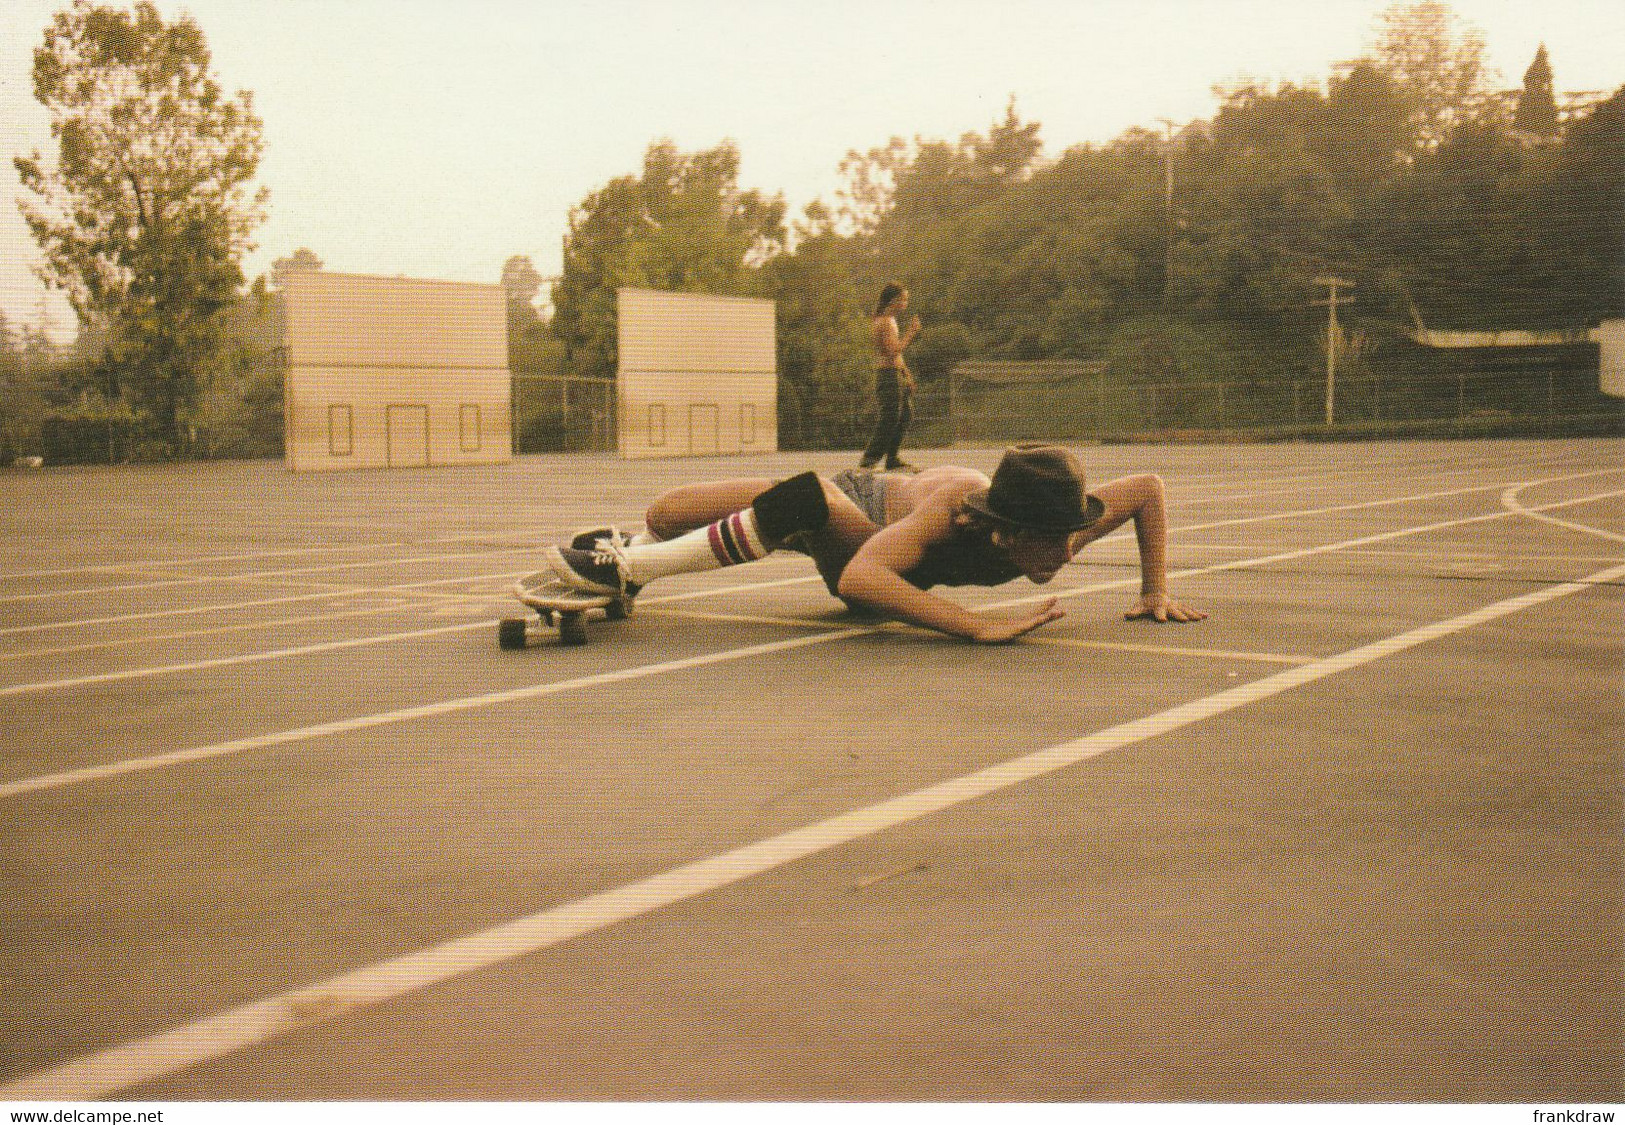 Postcard - Skate Boarding In The Seventies By H. Holland - How Mighty The Fallen- New - Skateboard